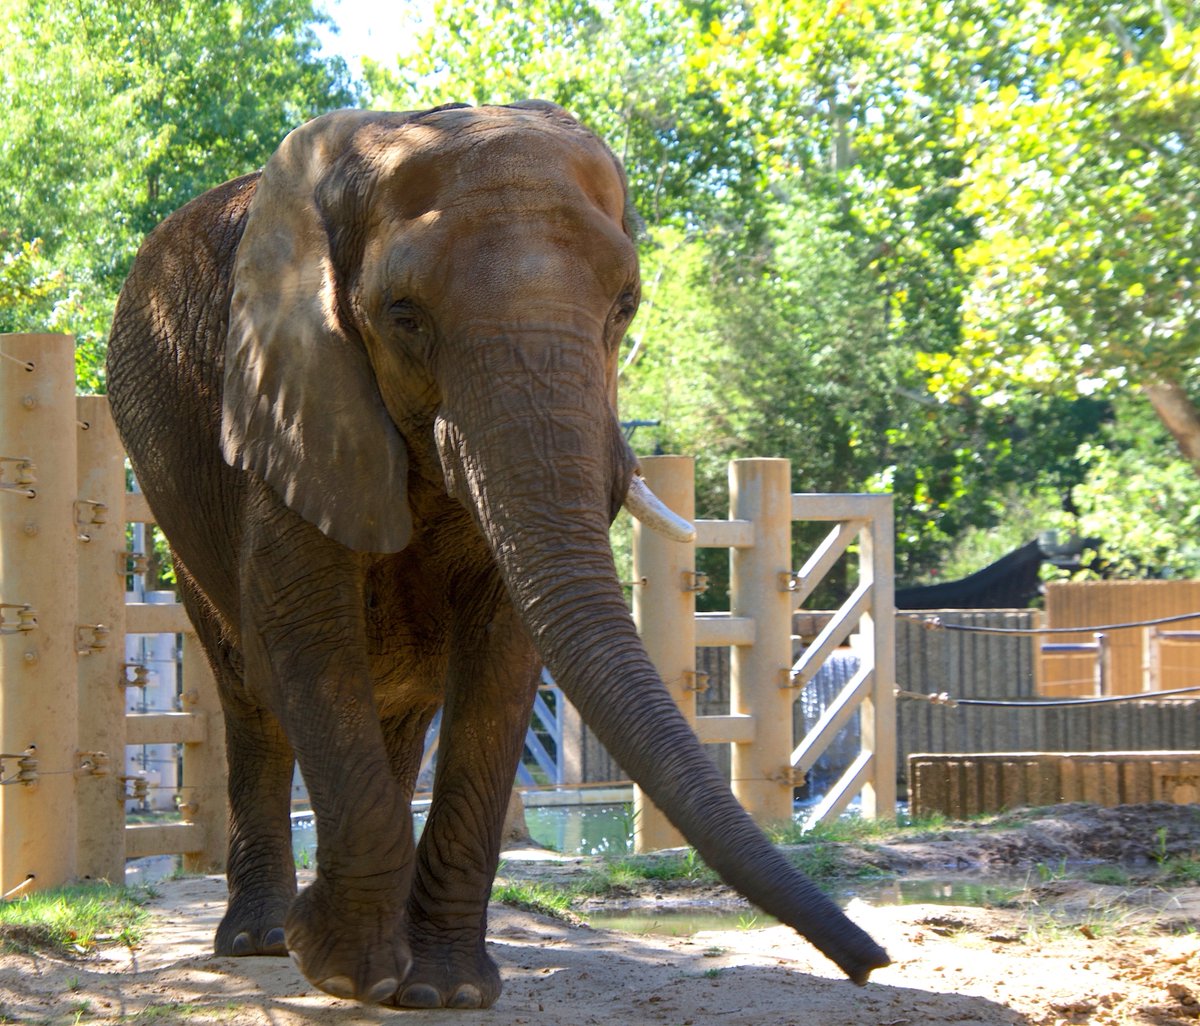 African elephants are the largest land animals on Earth, but they're also incredibly social and intelligent creatures! From their impressive memory to their social bonds, these gentle giants never cease to amaze. #MemphisZoo